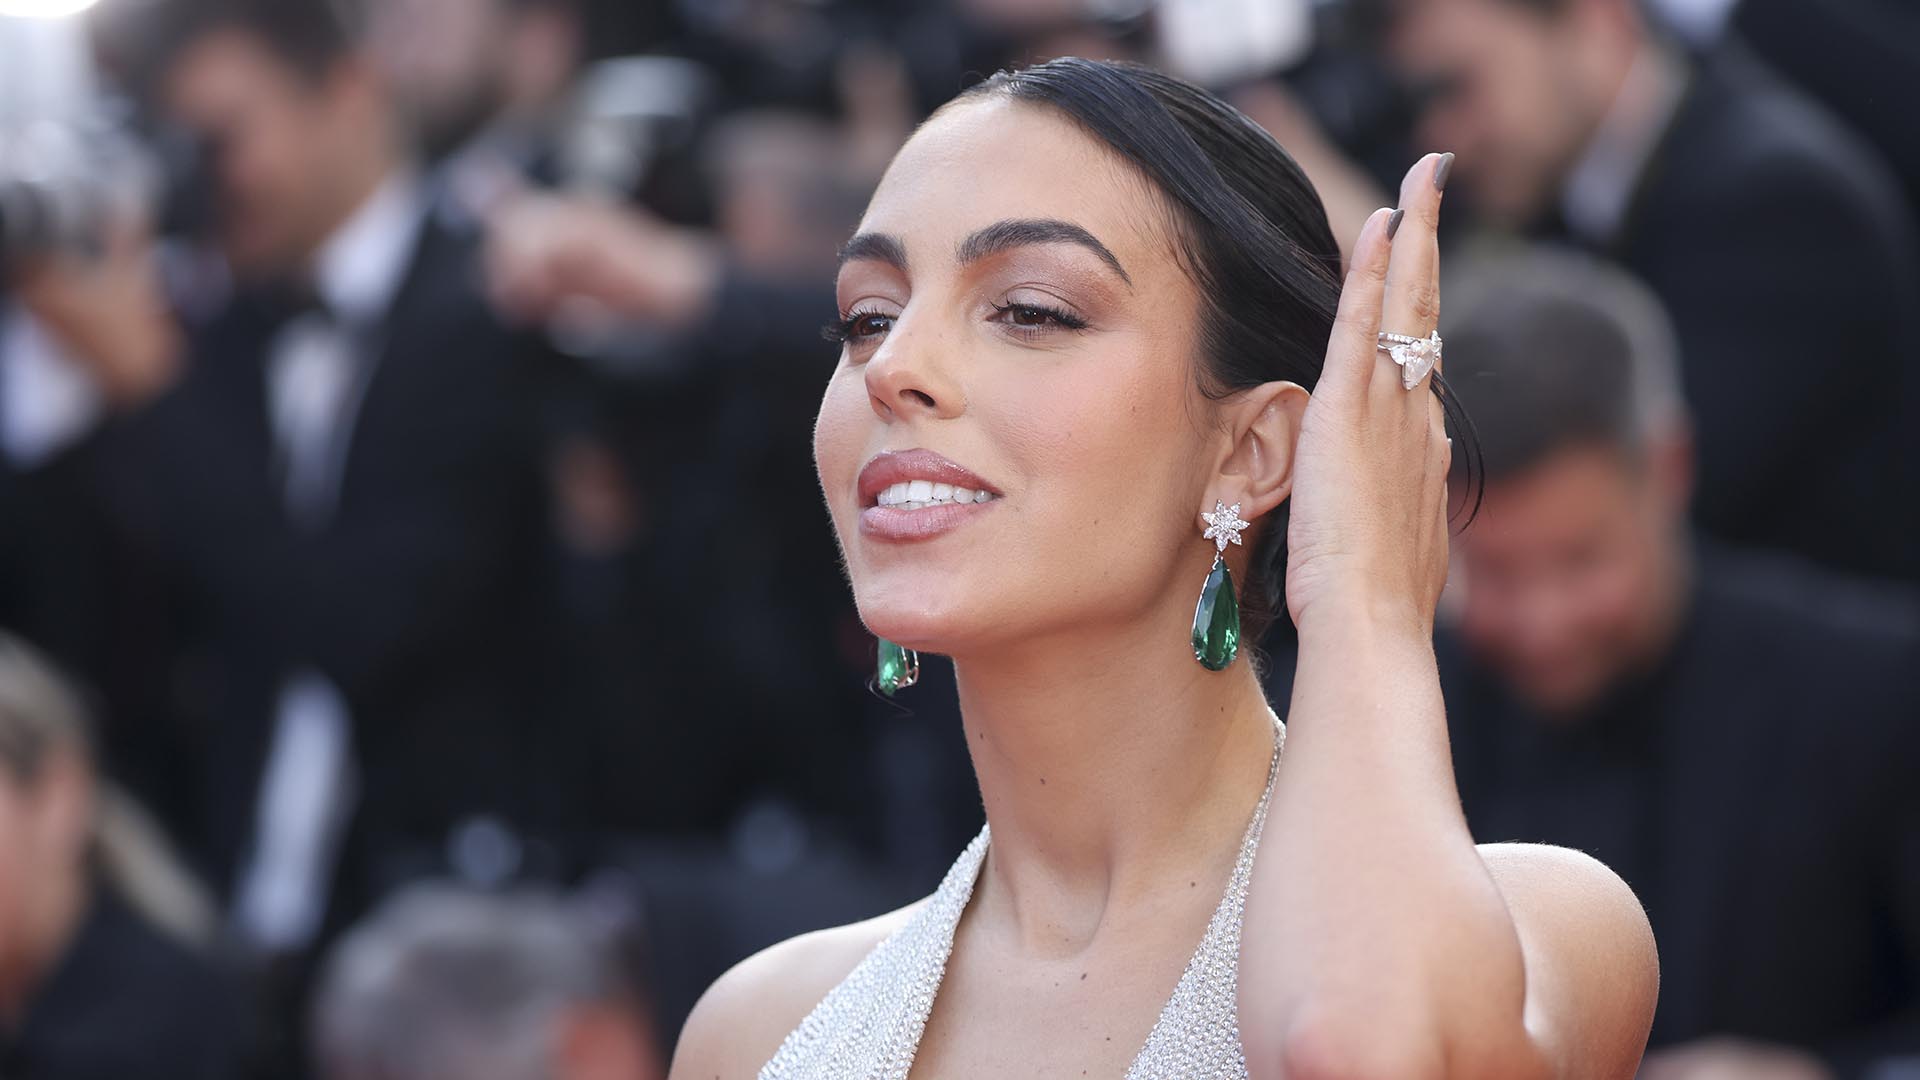 Georgina Rodriguez at premiere film «Elvis» during the 75th annual Cannes film festival on May 25, 2022 in Cannes, France.